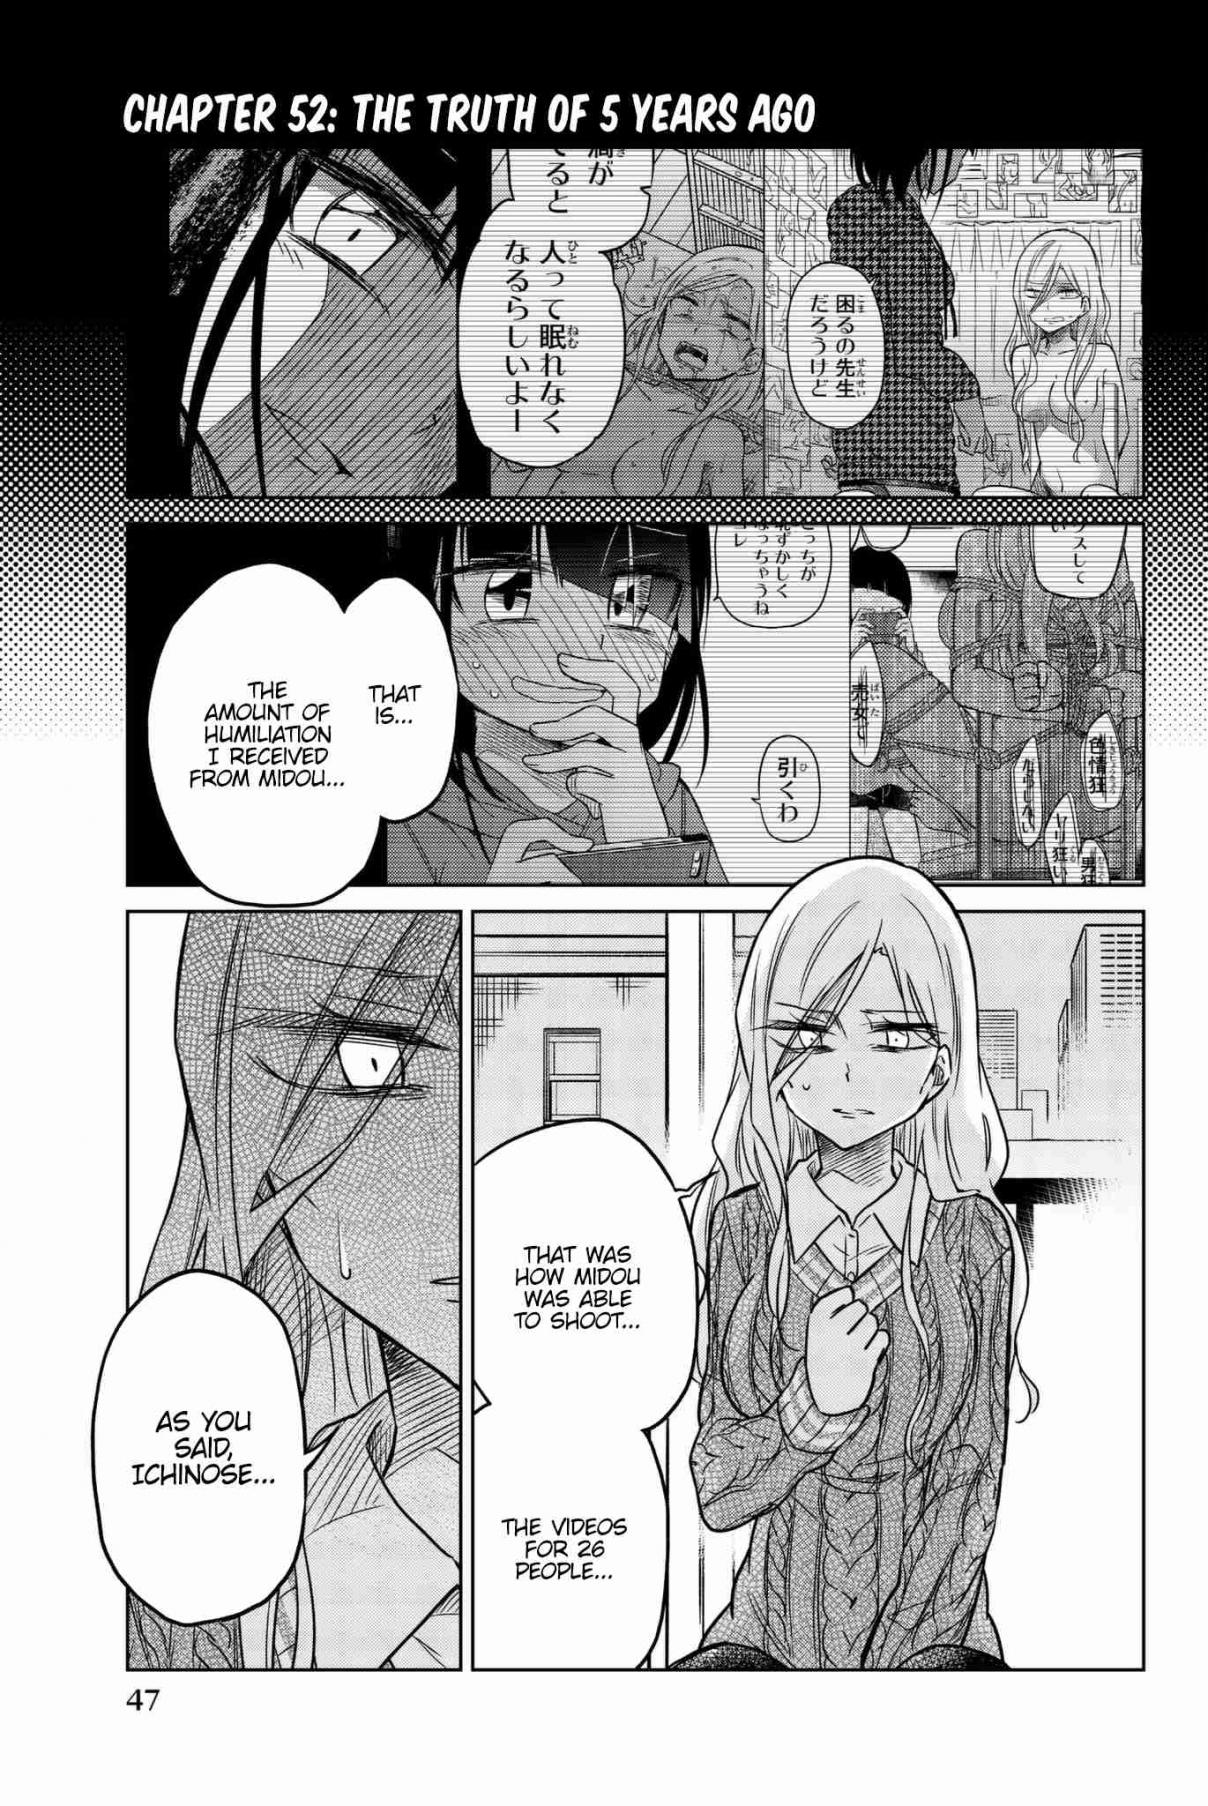 Ijousha no Ai Vol. 5 Ch. 52 The Truth From Five Years Ago